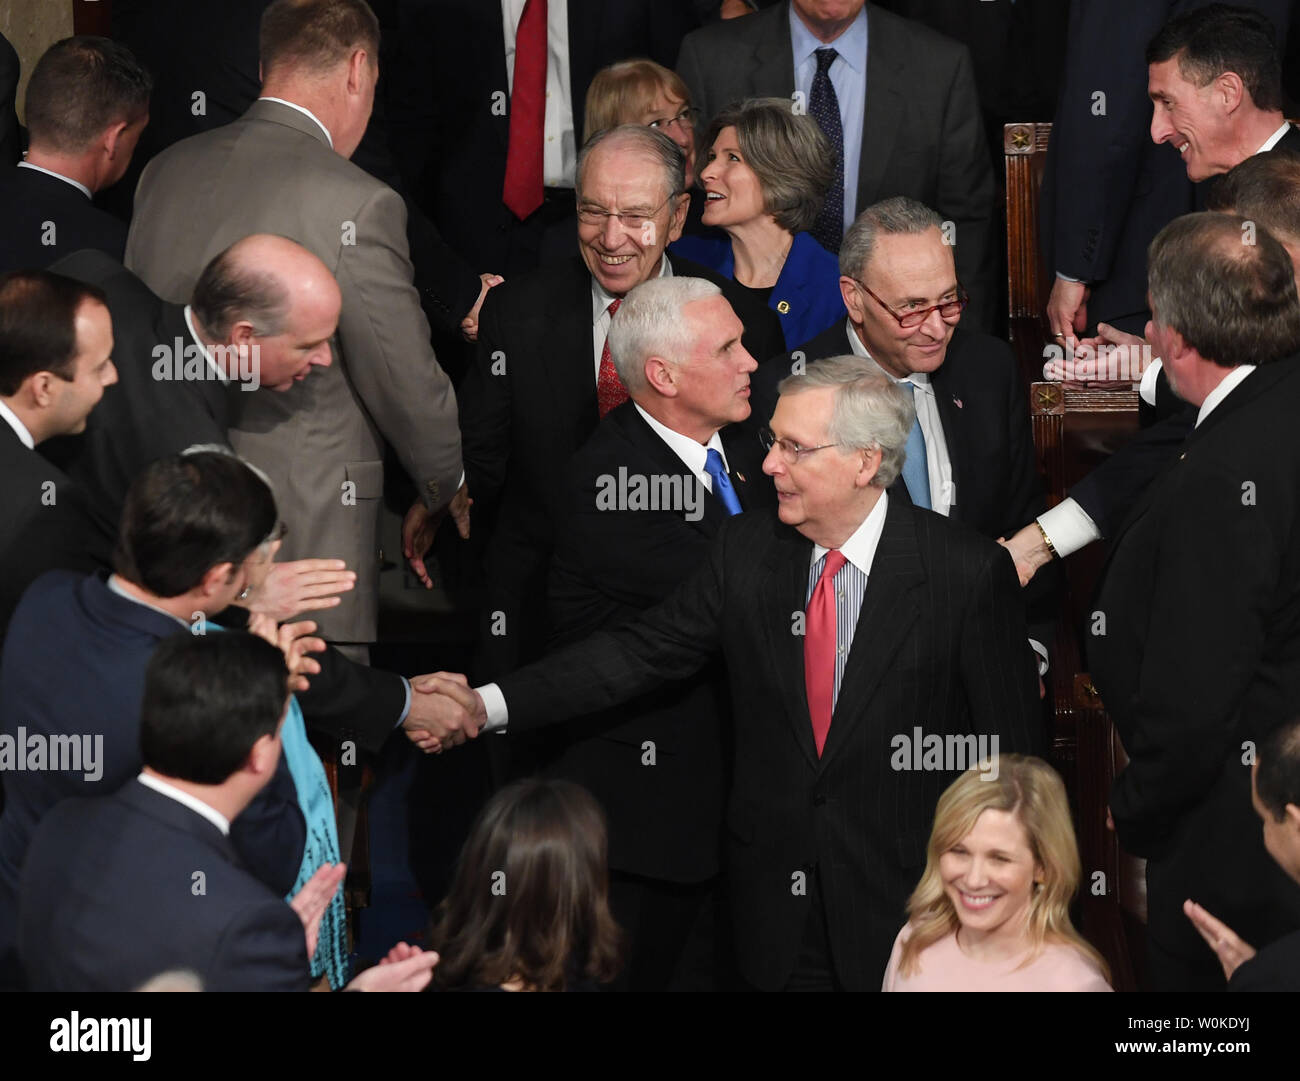 Senate Majority Leader Mitch McConnell, Vice President Mike Pence and Minority Leader Chuck Schumer lead in members of the Senate for President Donald Trump's State of the Union address to a joint session of Congress in the House Chamber of the U.S. Capitol in Washington, DC on February 5, 2019.  Photo by Pat Benic/UPI Stock Photo